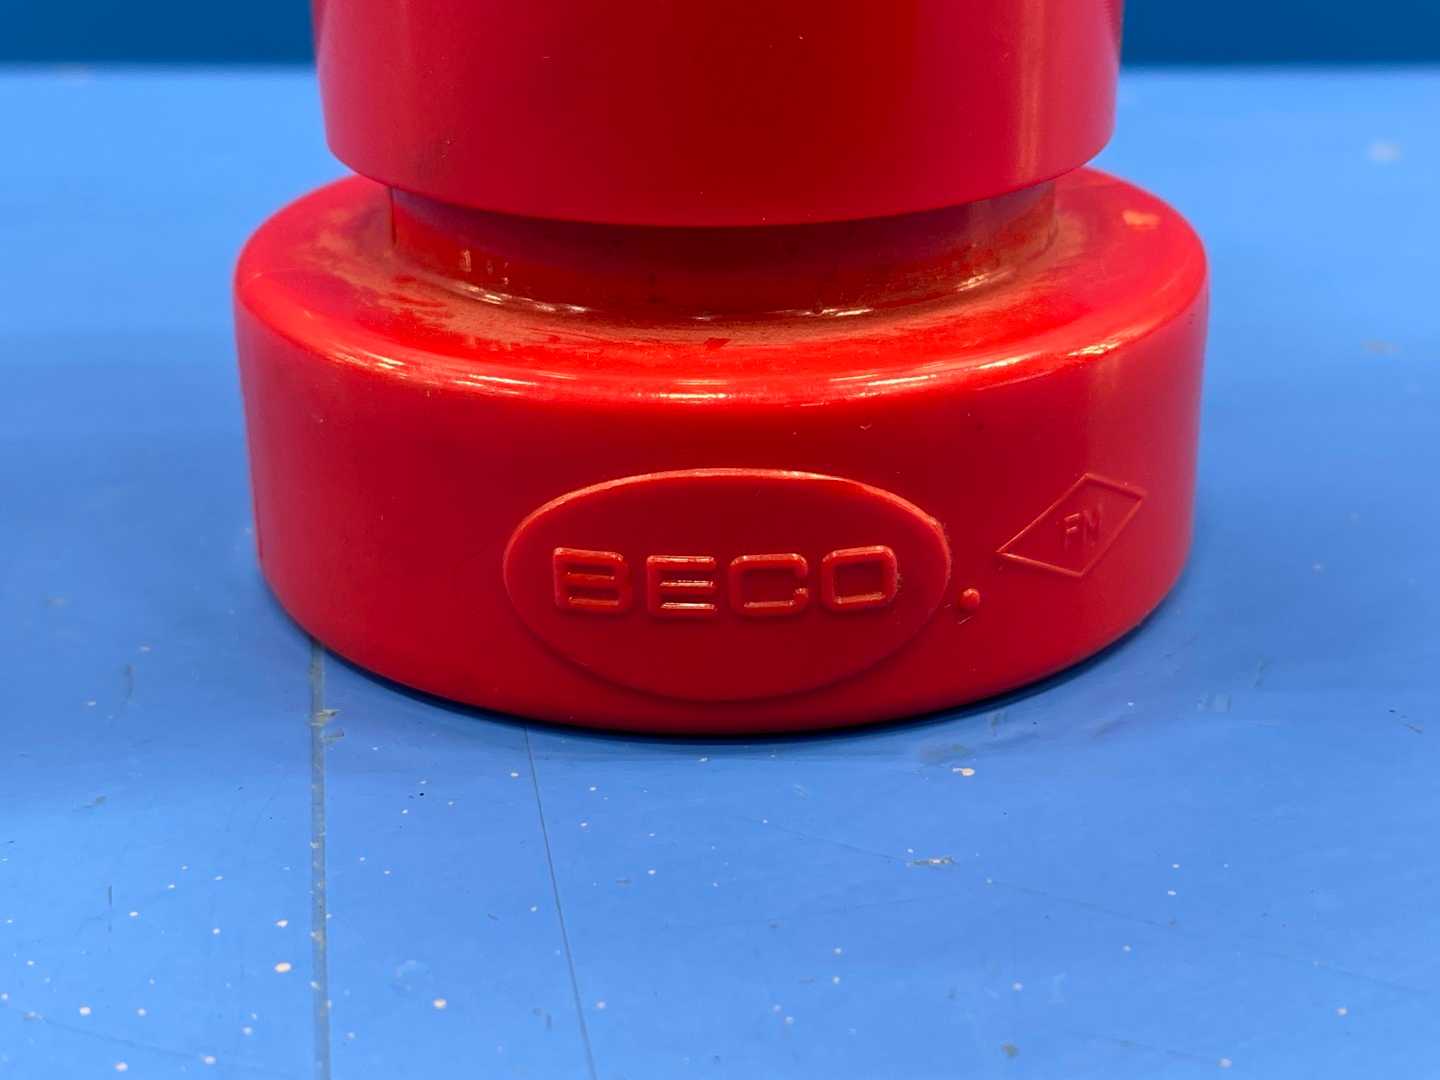 Beco 15 Red Fire Portable Hose Nozzle 